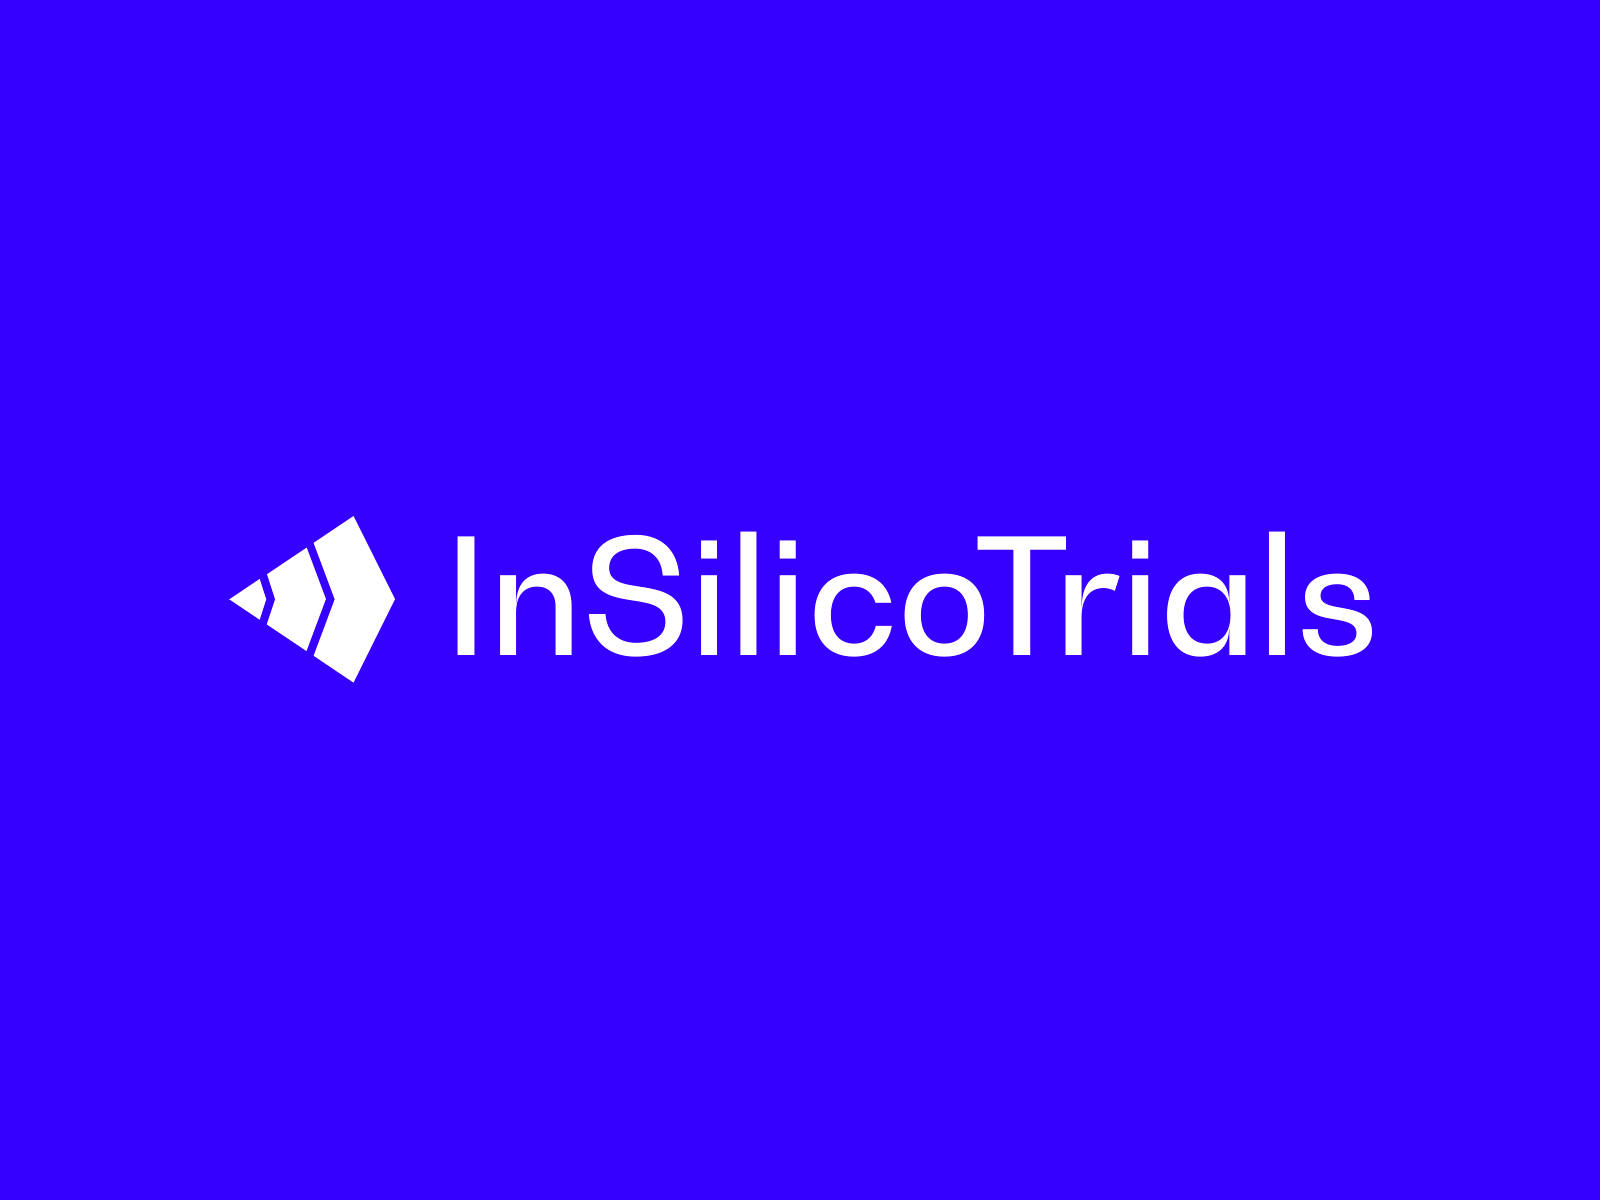 InSilicoTrials, new visual identity and website